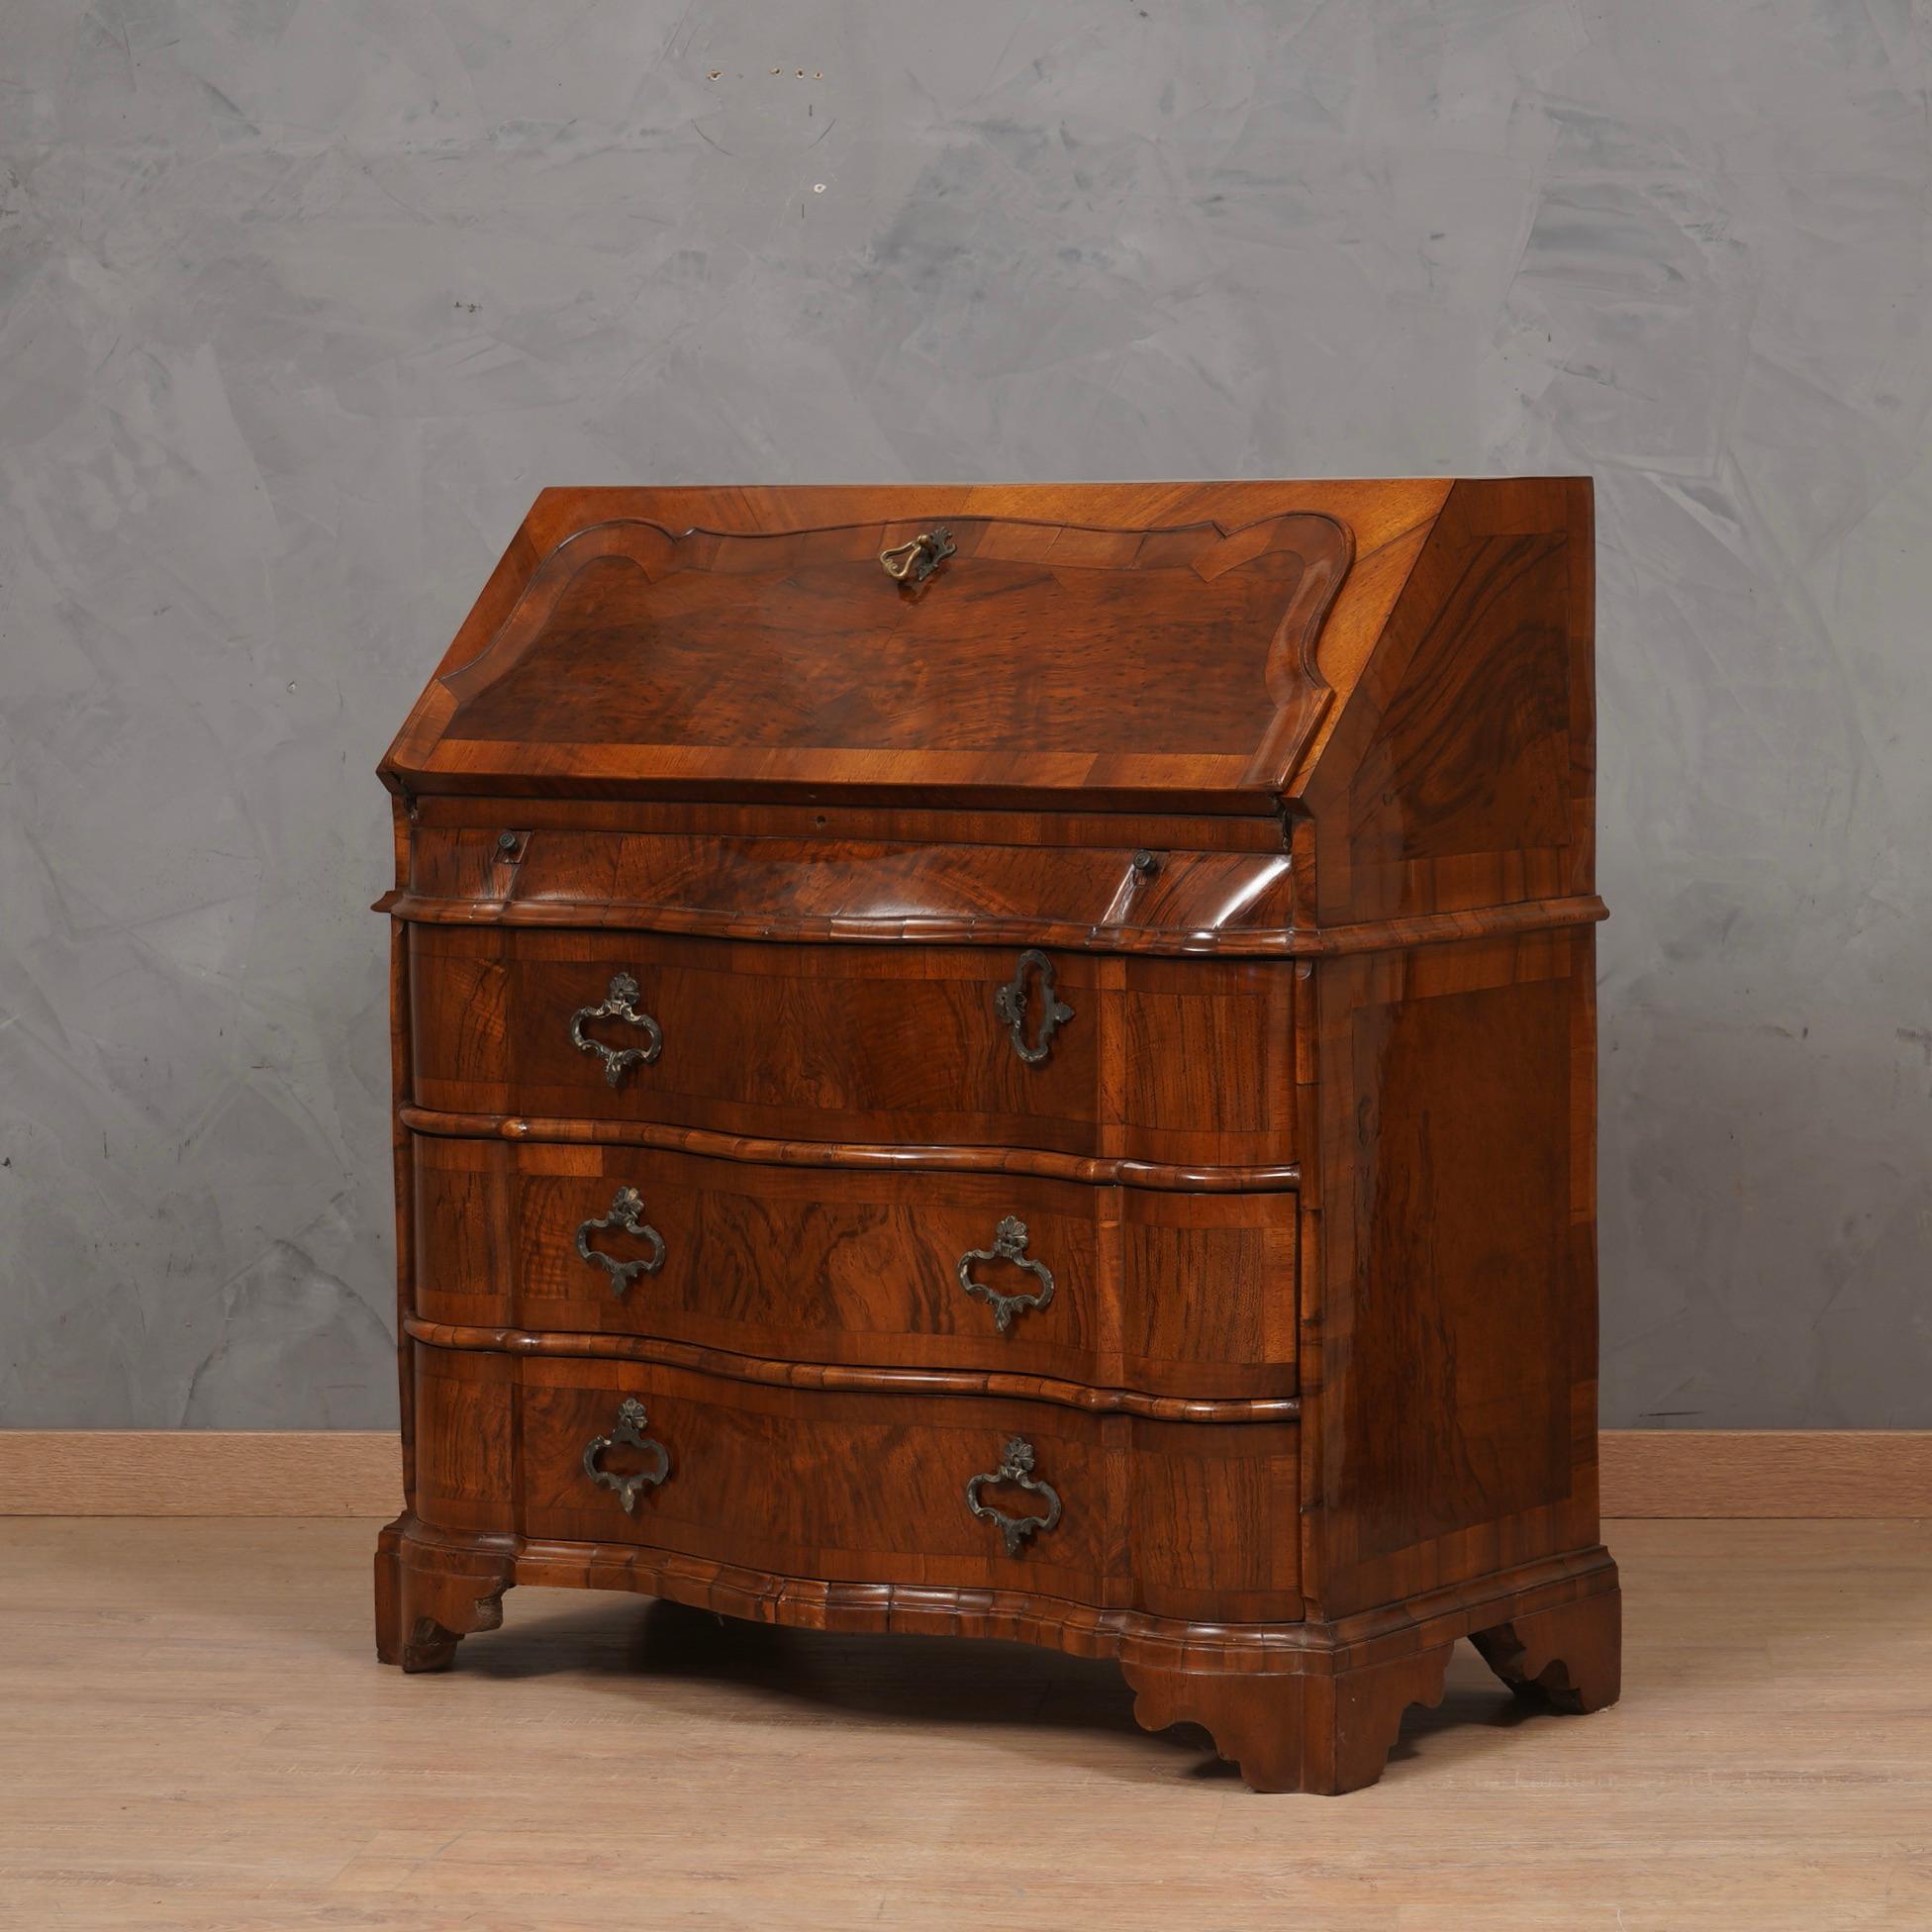 Italian chest of drawers of 1850, with a door that opens up to form a desk.

 All veneered in walnut wood, with upper door that acts as a desk. Externally closed it appears with a flat upper door with three drawers below. But then, opening the door